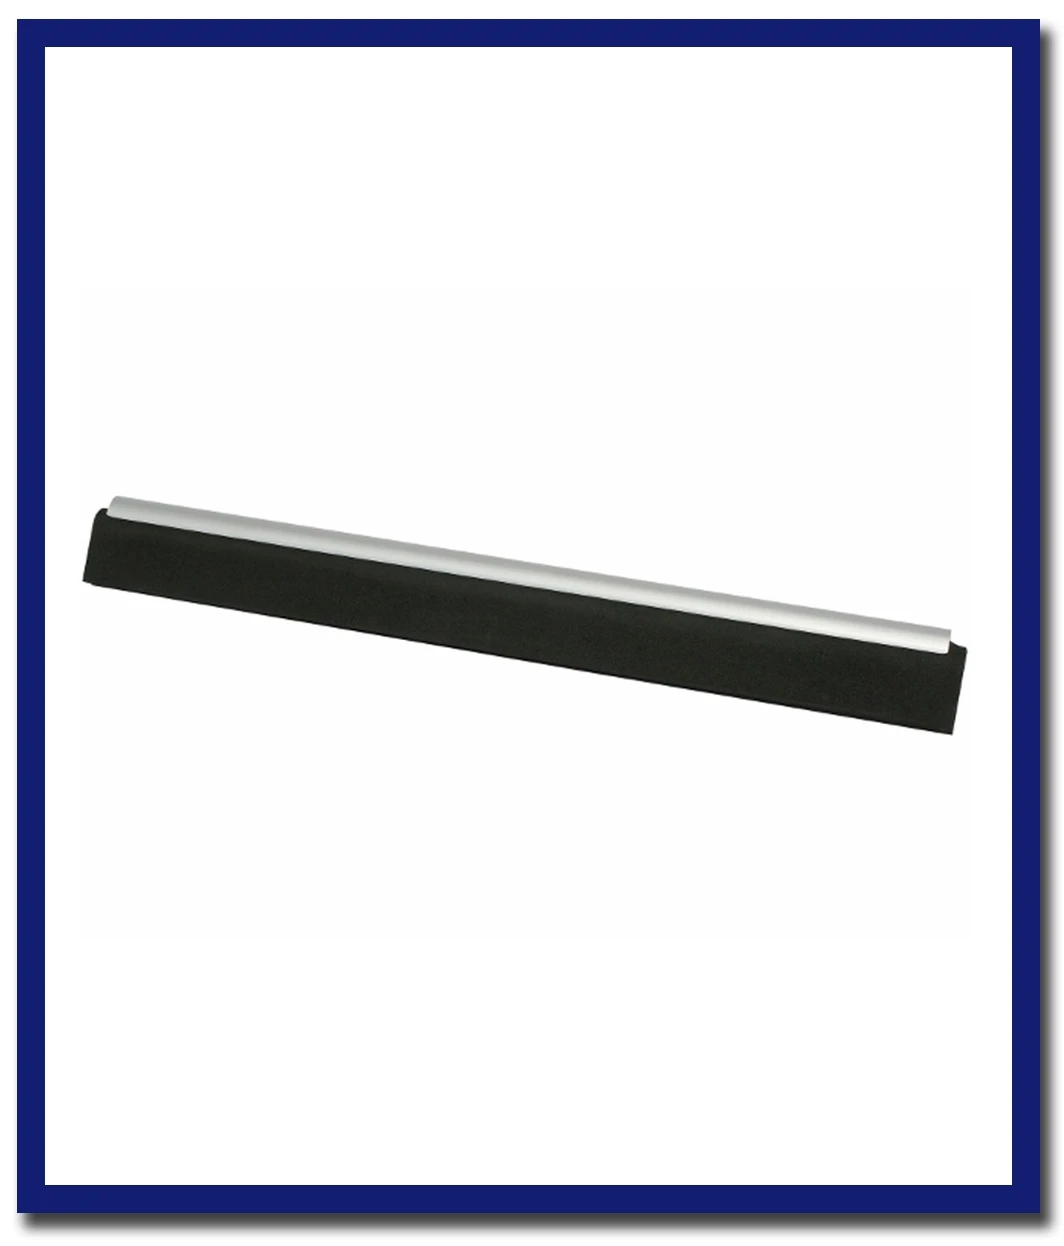 Edco Black Neoprene Floor Squeegee Refill - 1 Pc - Stone Doctor Australia - Cleaning Products > Floor Squeegee > Refill